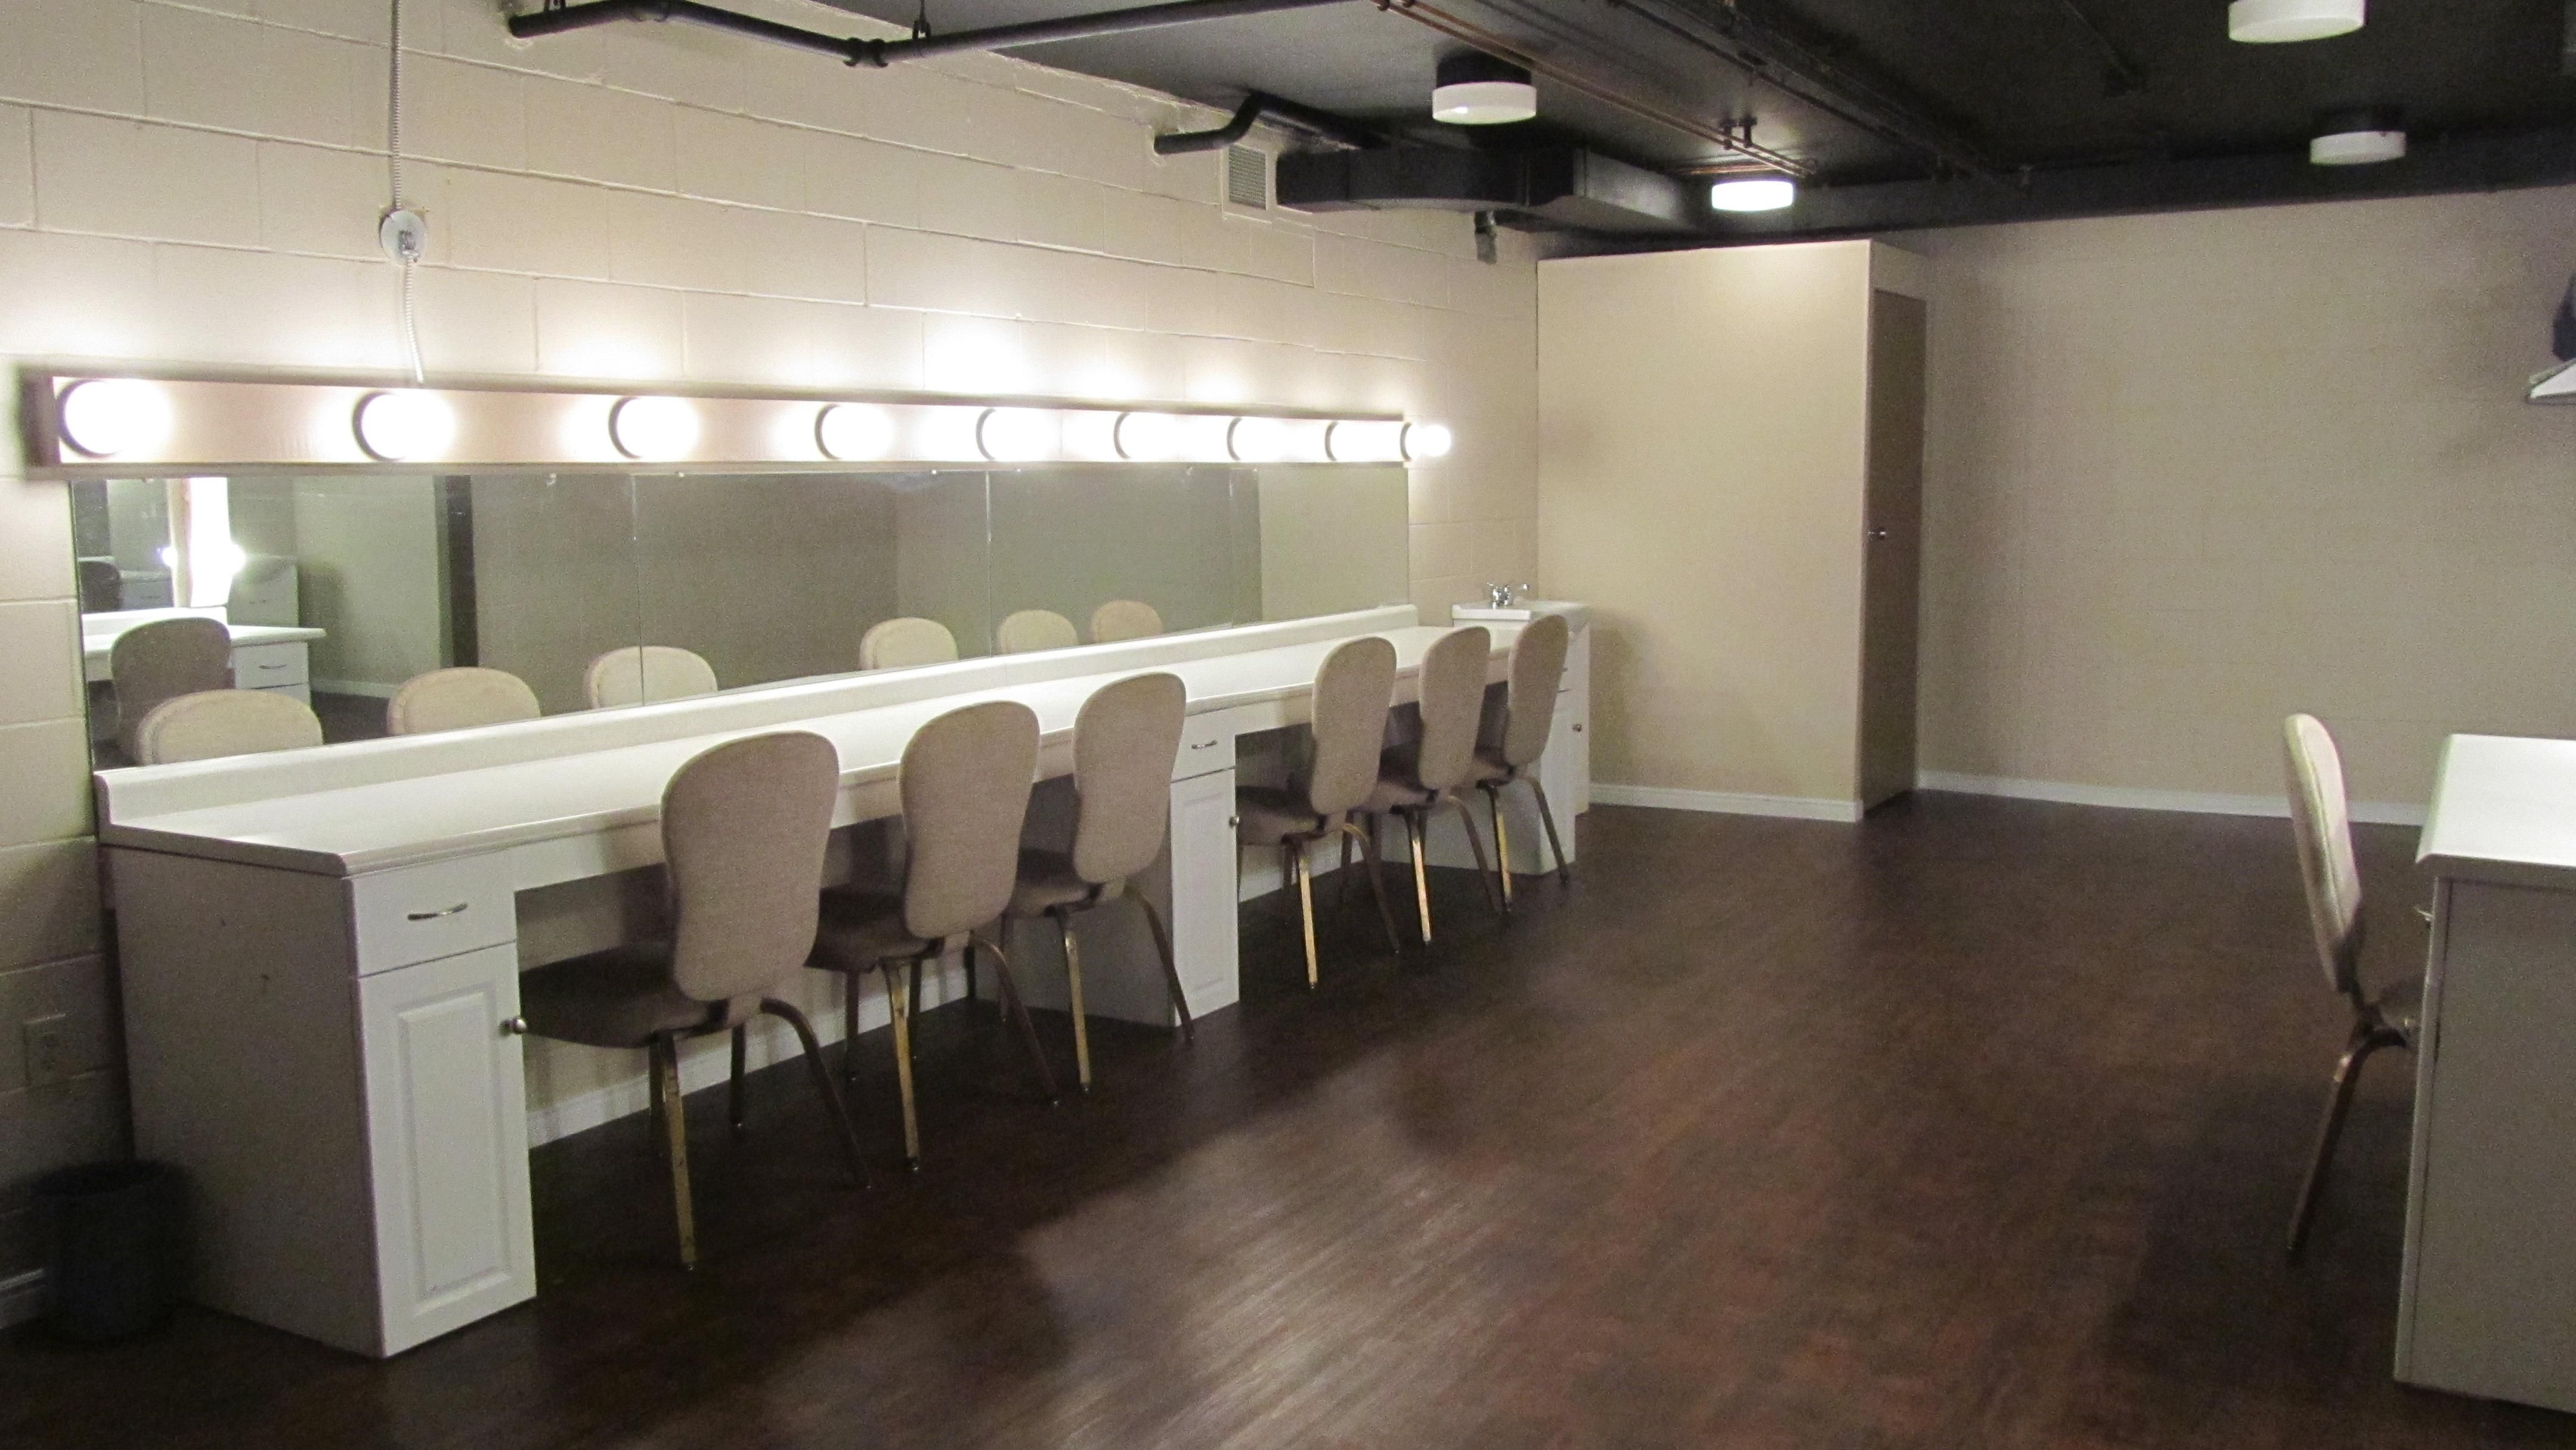 Theater Dressing Room Mirror Lighting | Affordable Ambience Decor With Regard To Mirrors For Dressing Rooms (View 17 of 20)